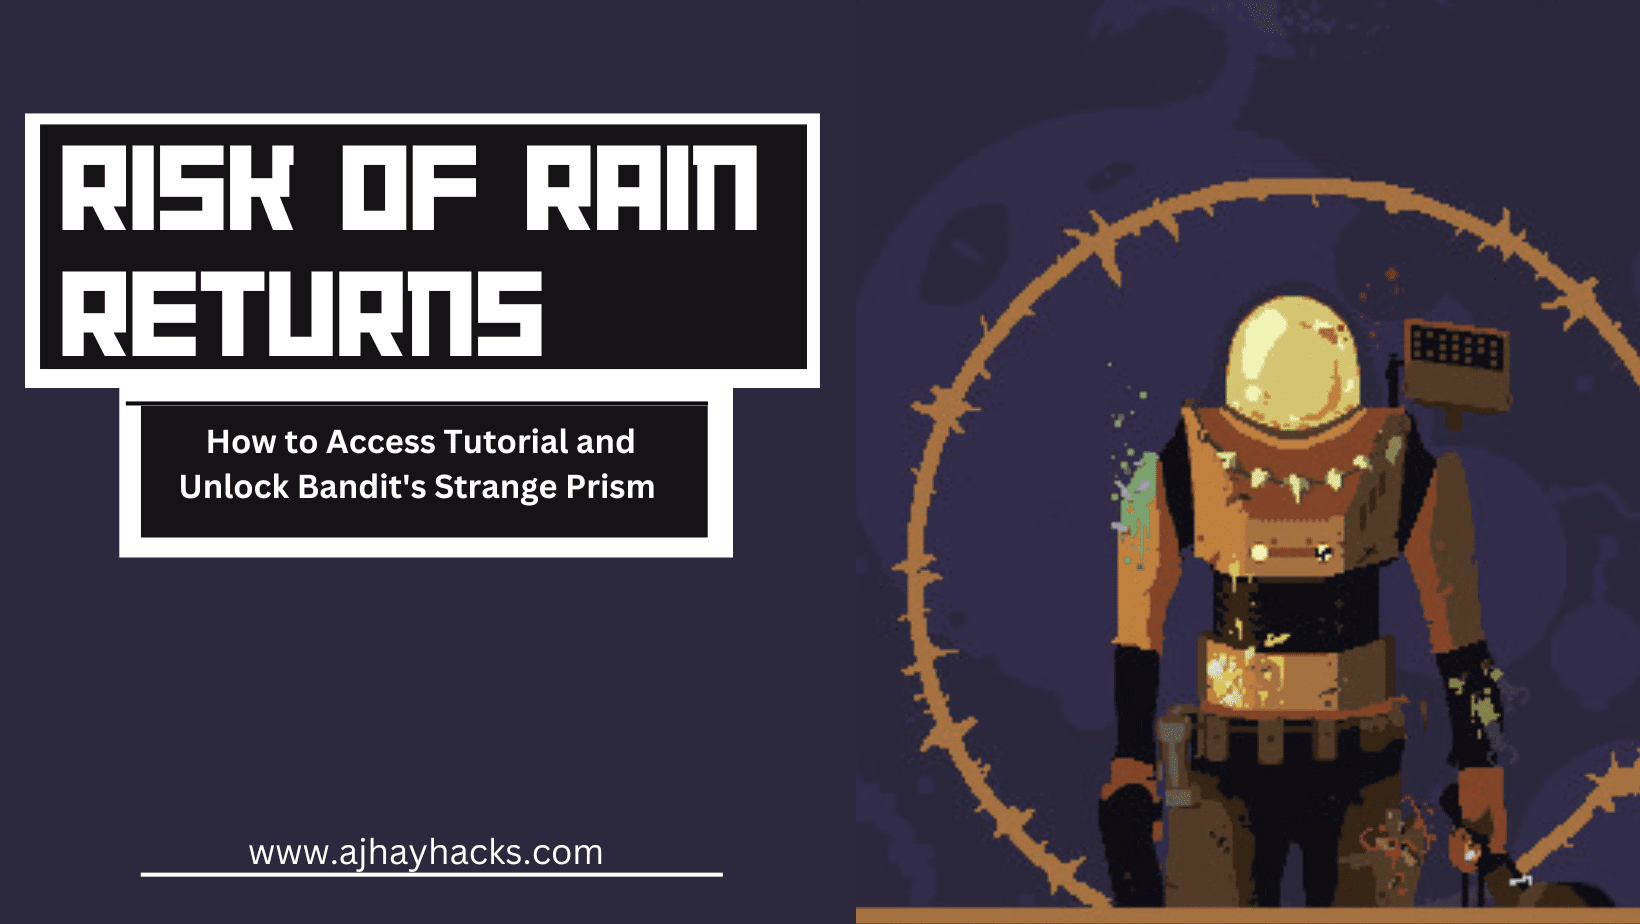 Risk of Rain Returns: How to Access Tutorial and Unlock Bandit's Strange Prism